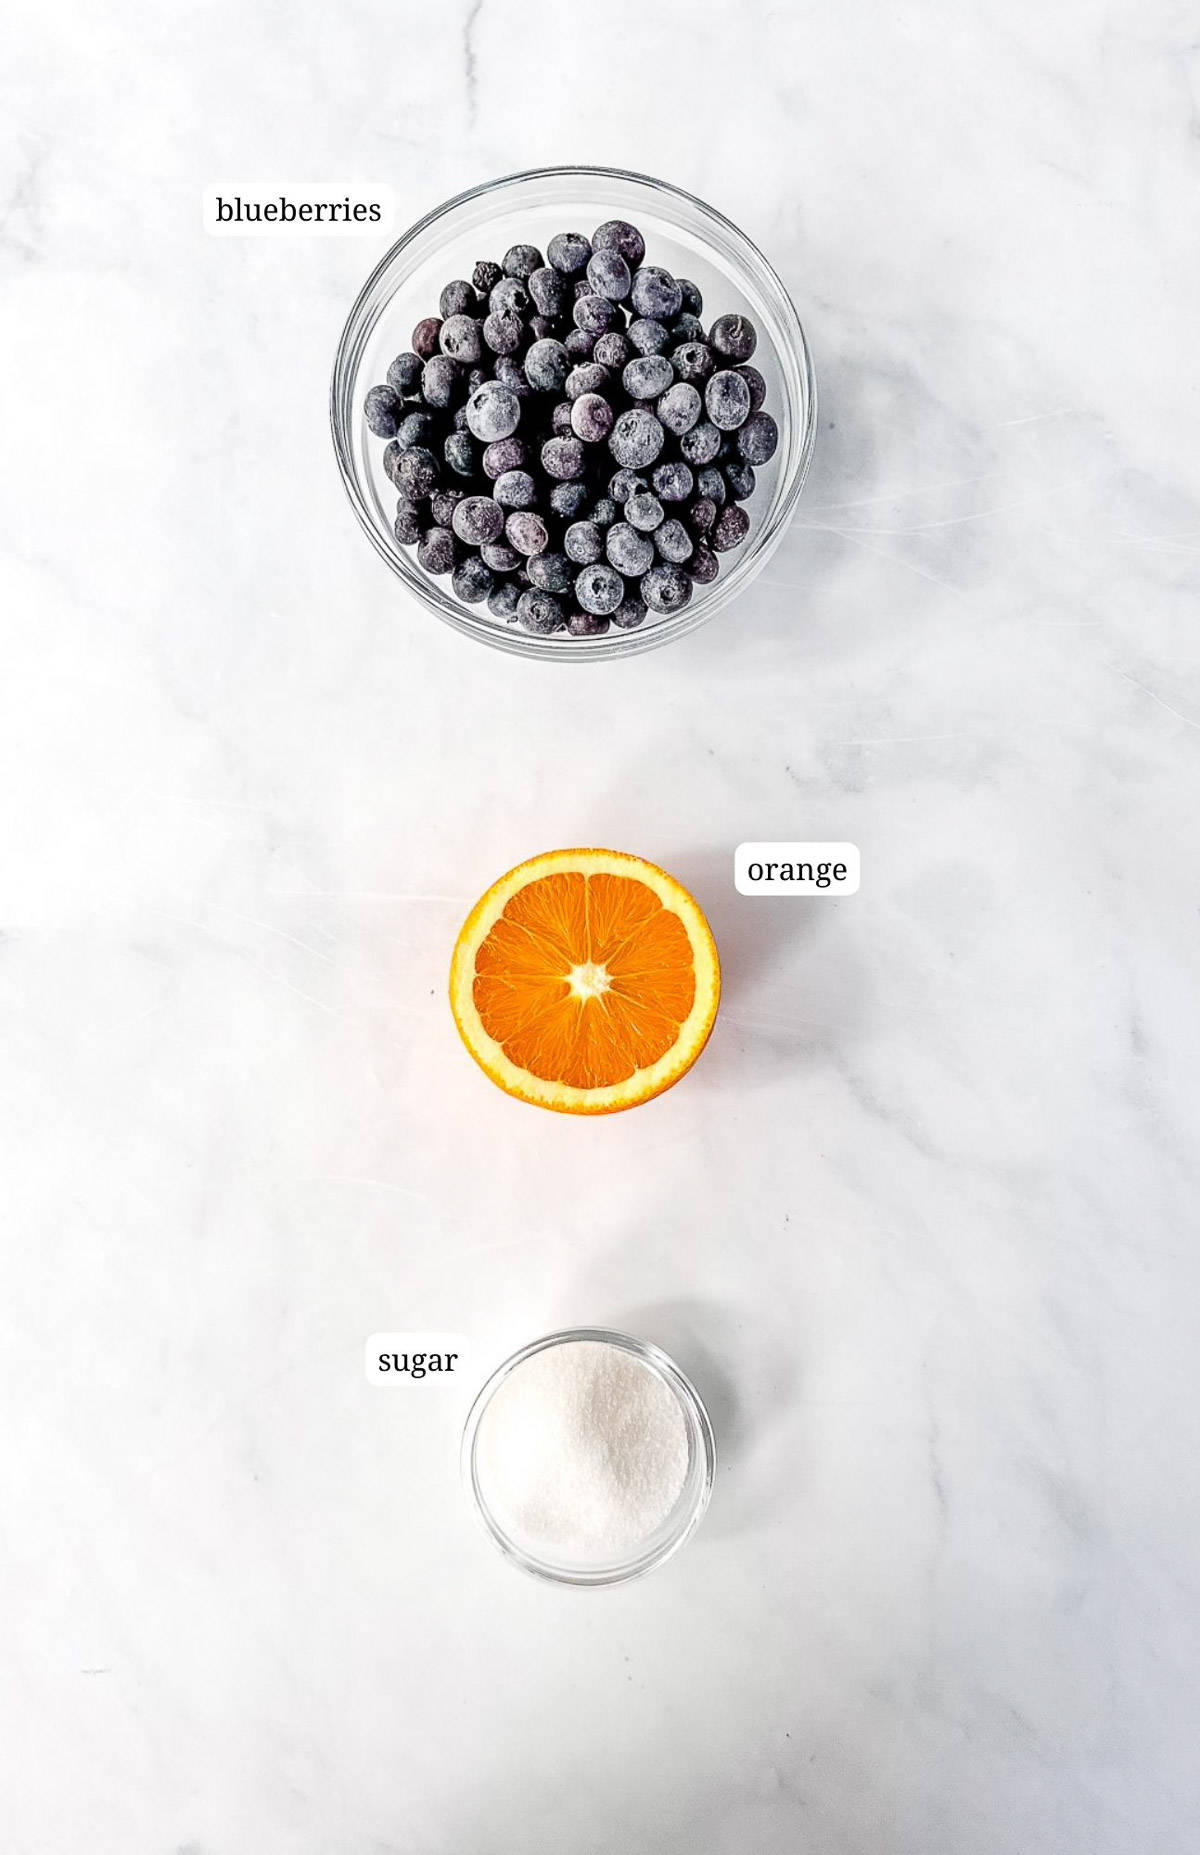 Labeled image of the ingredients needed to make blueberry jam with orange.